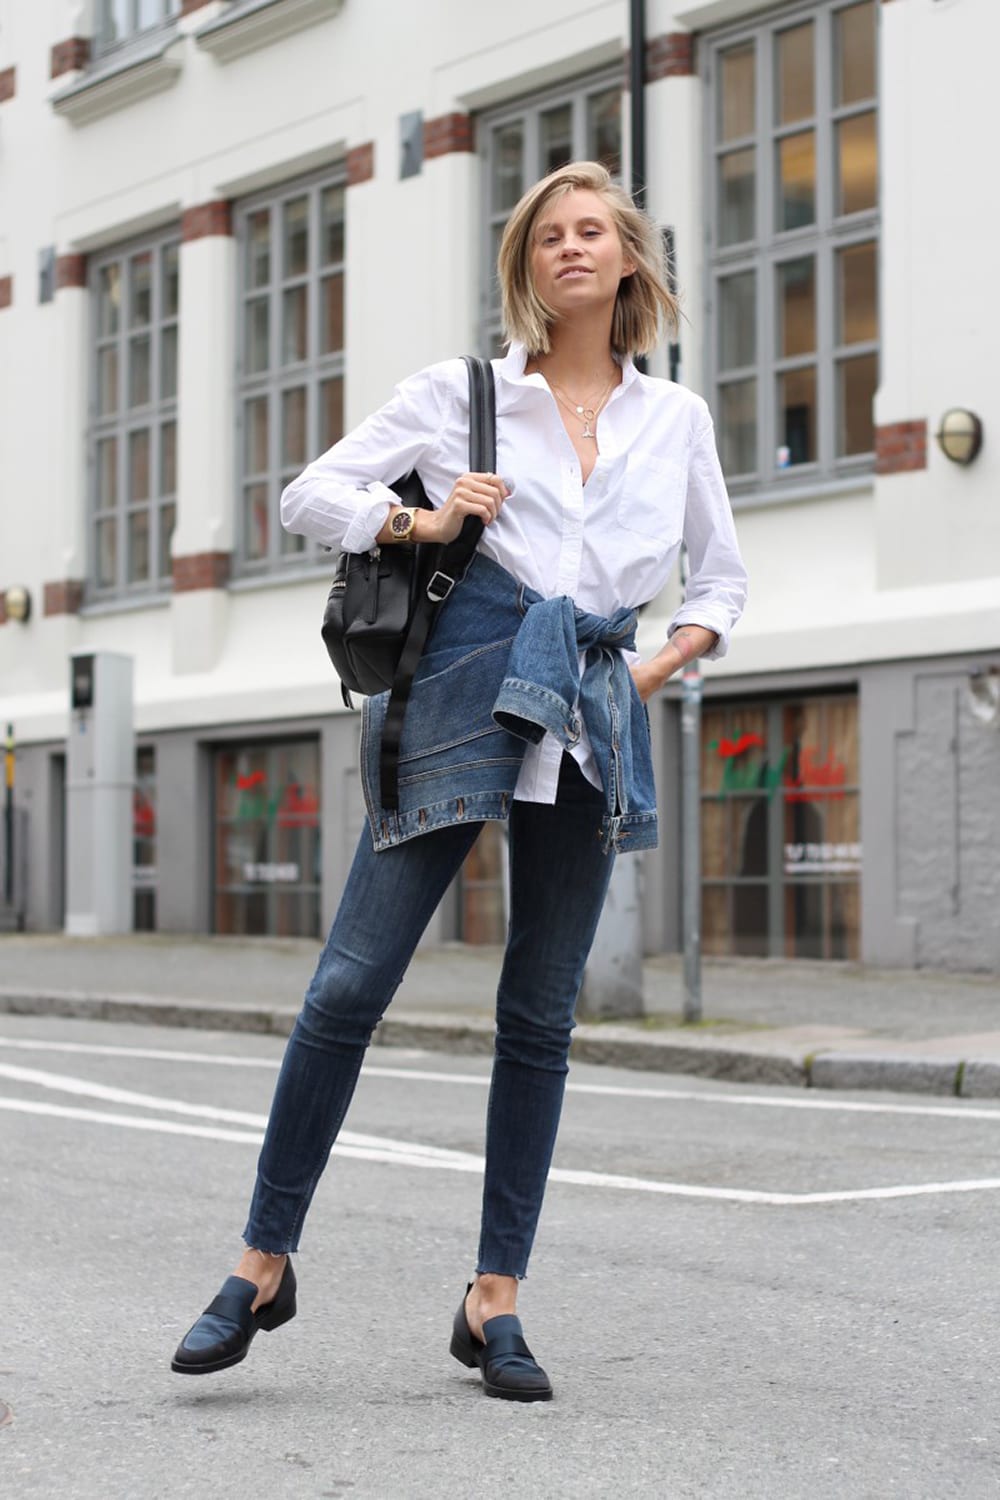 7 Bloggers To Follow Now - Styling Inspiration - Style&Minimalism